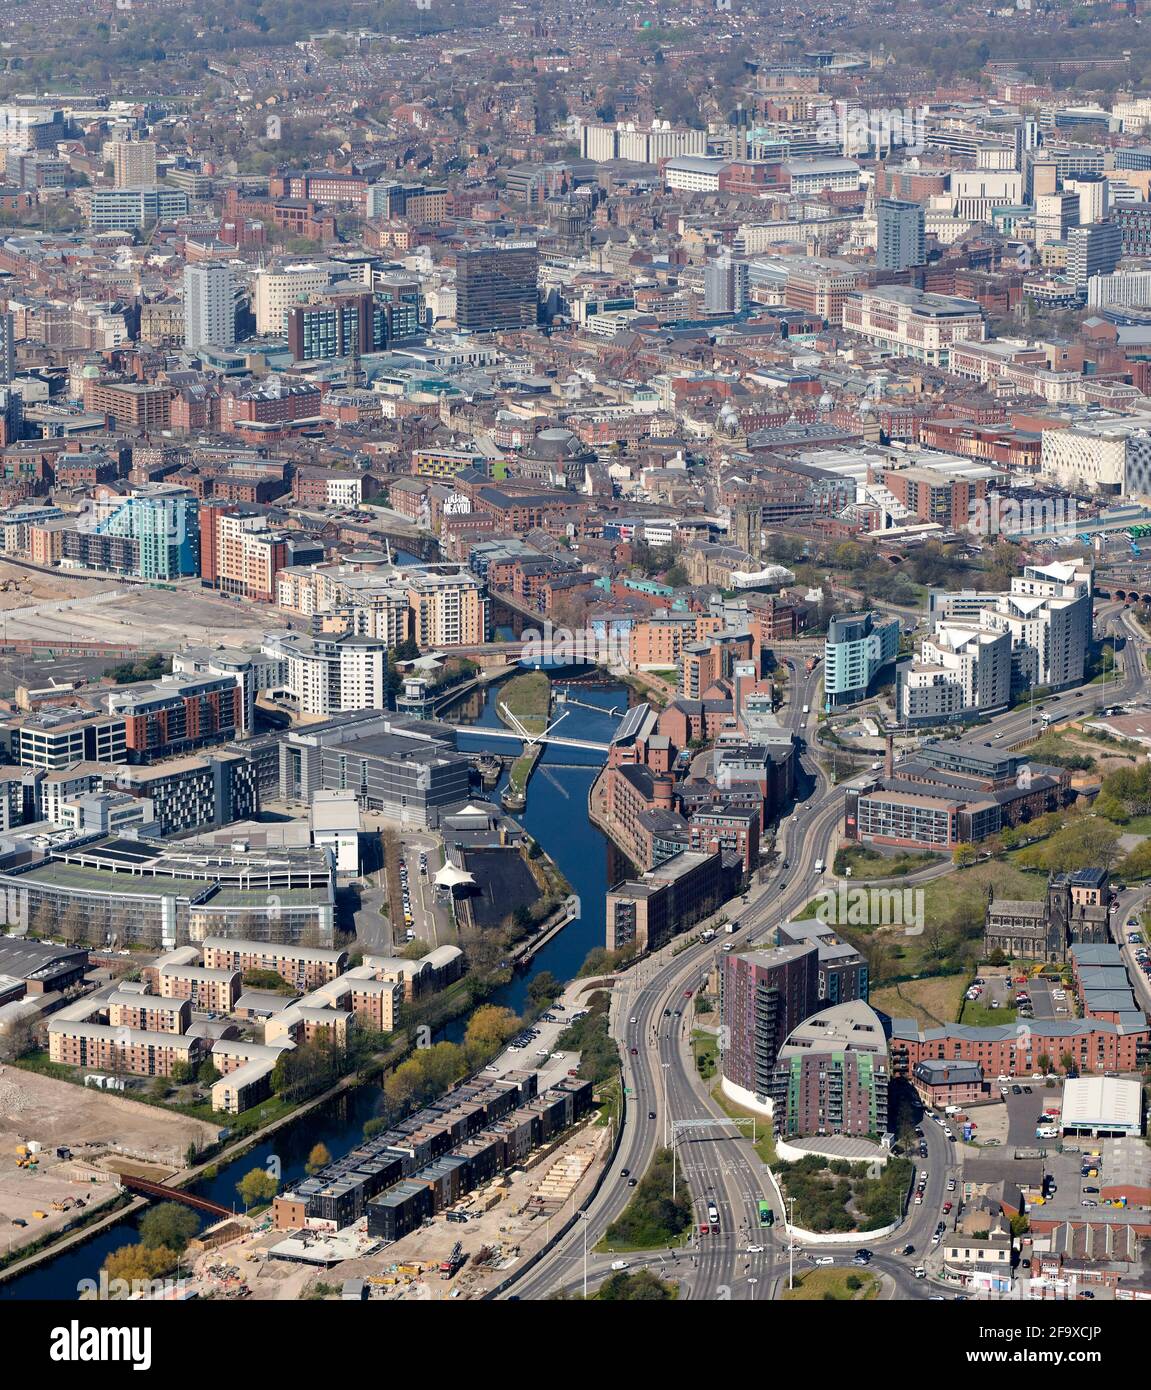 An aerial view of Leeds City Centre, West Yorkshire, Northern England, UK, from the east looking up the River Aire showing new riverside development Stock Photo